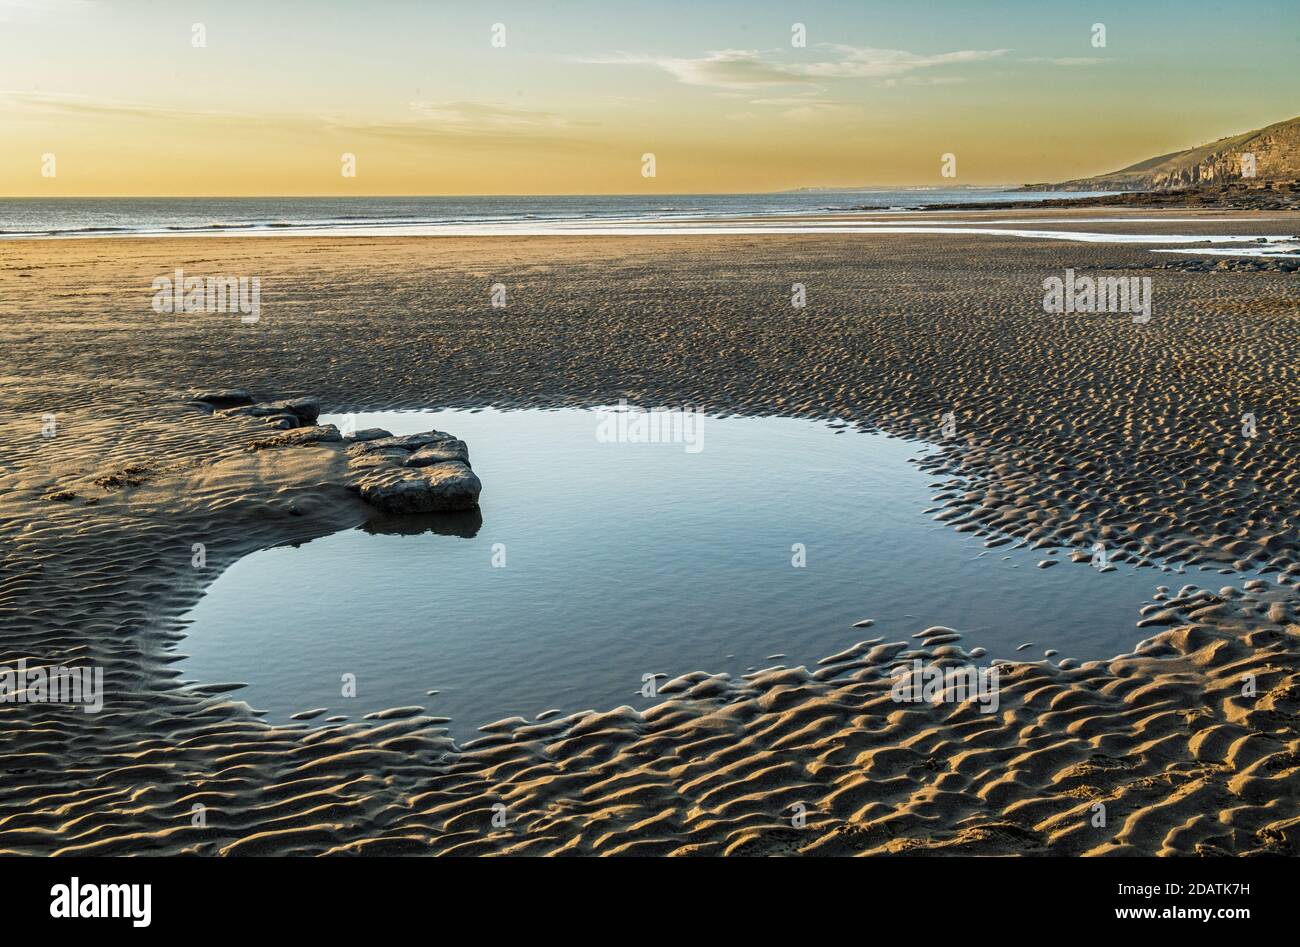 Dunraven Bay on the Glamorgan Heritage Coast in south Wales with a heart shaped pool on the beach. Stock Photo